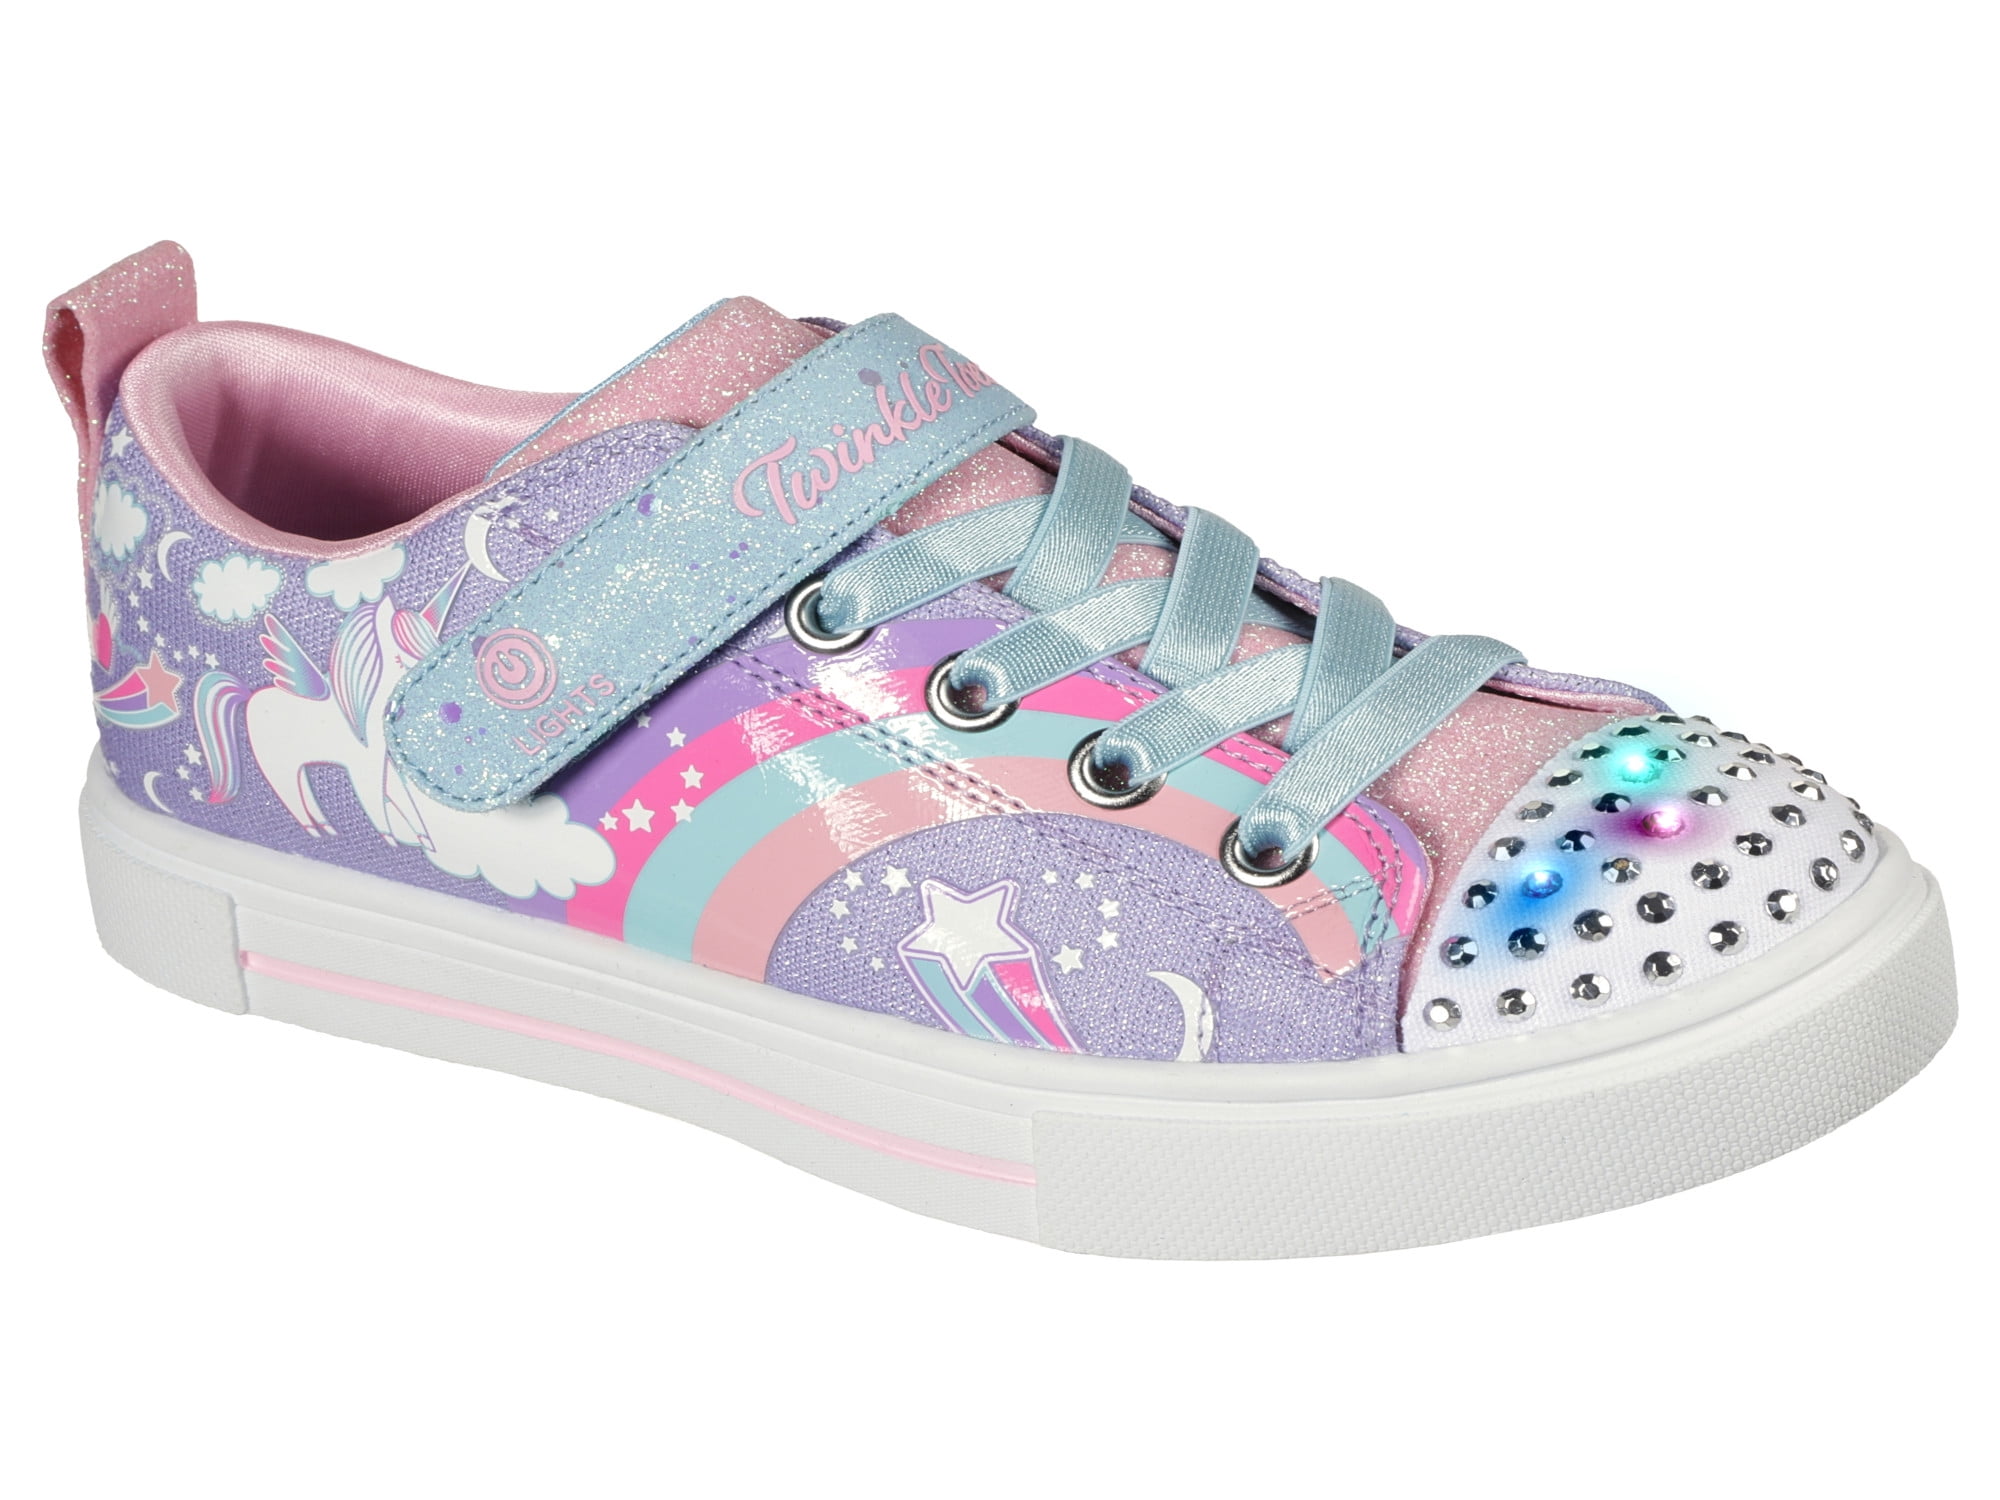 Skechers Girls Youth Twinkle Toes Light Up Sneakers - Unicorn Charm, Sizes 10.5-3 -